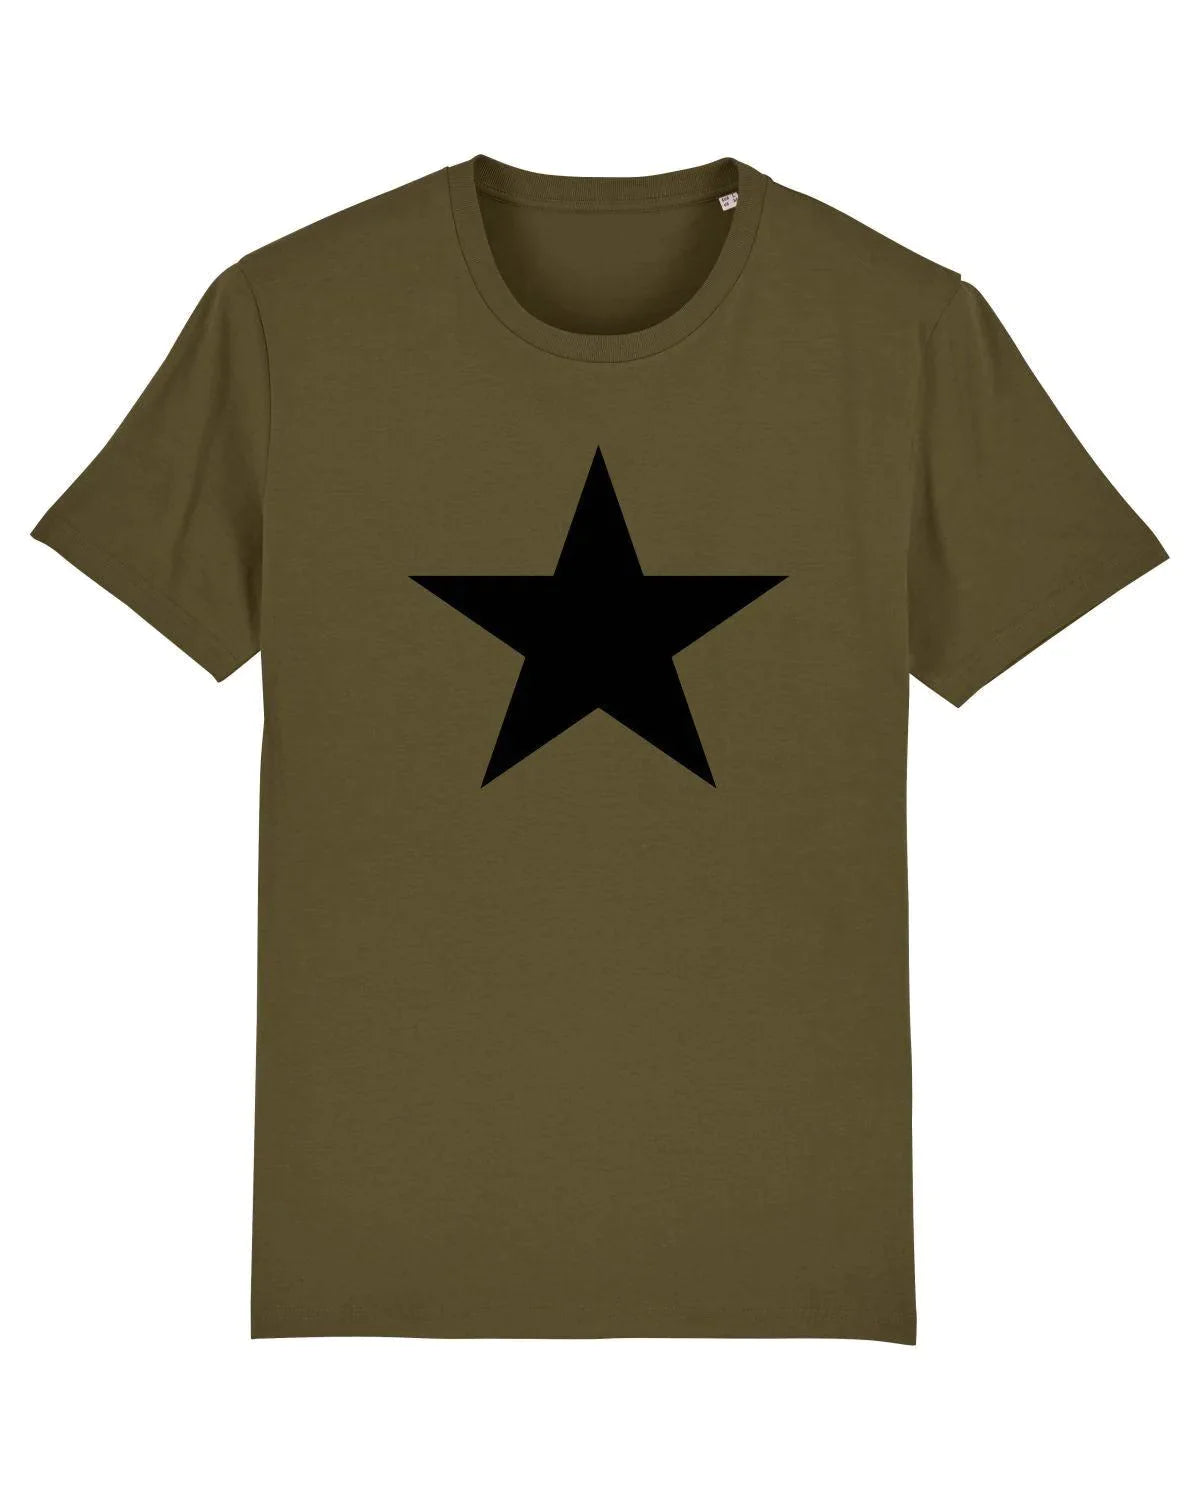 BLACK STAR: As Worn By Michael Stipe (R.E.M) and Indie Kids. T-Shirt And Sweatshirt - SOUND IS COLOUR